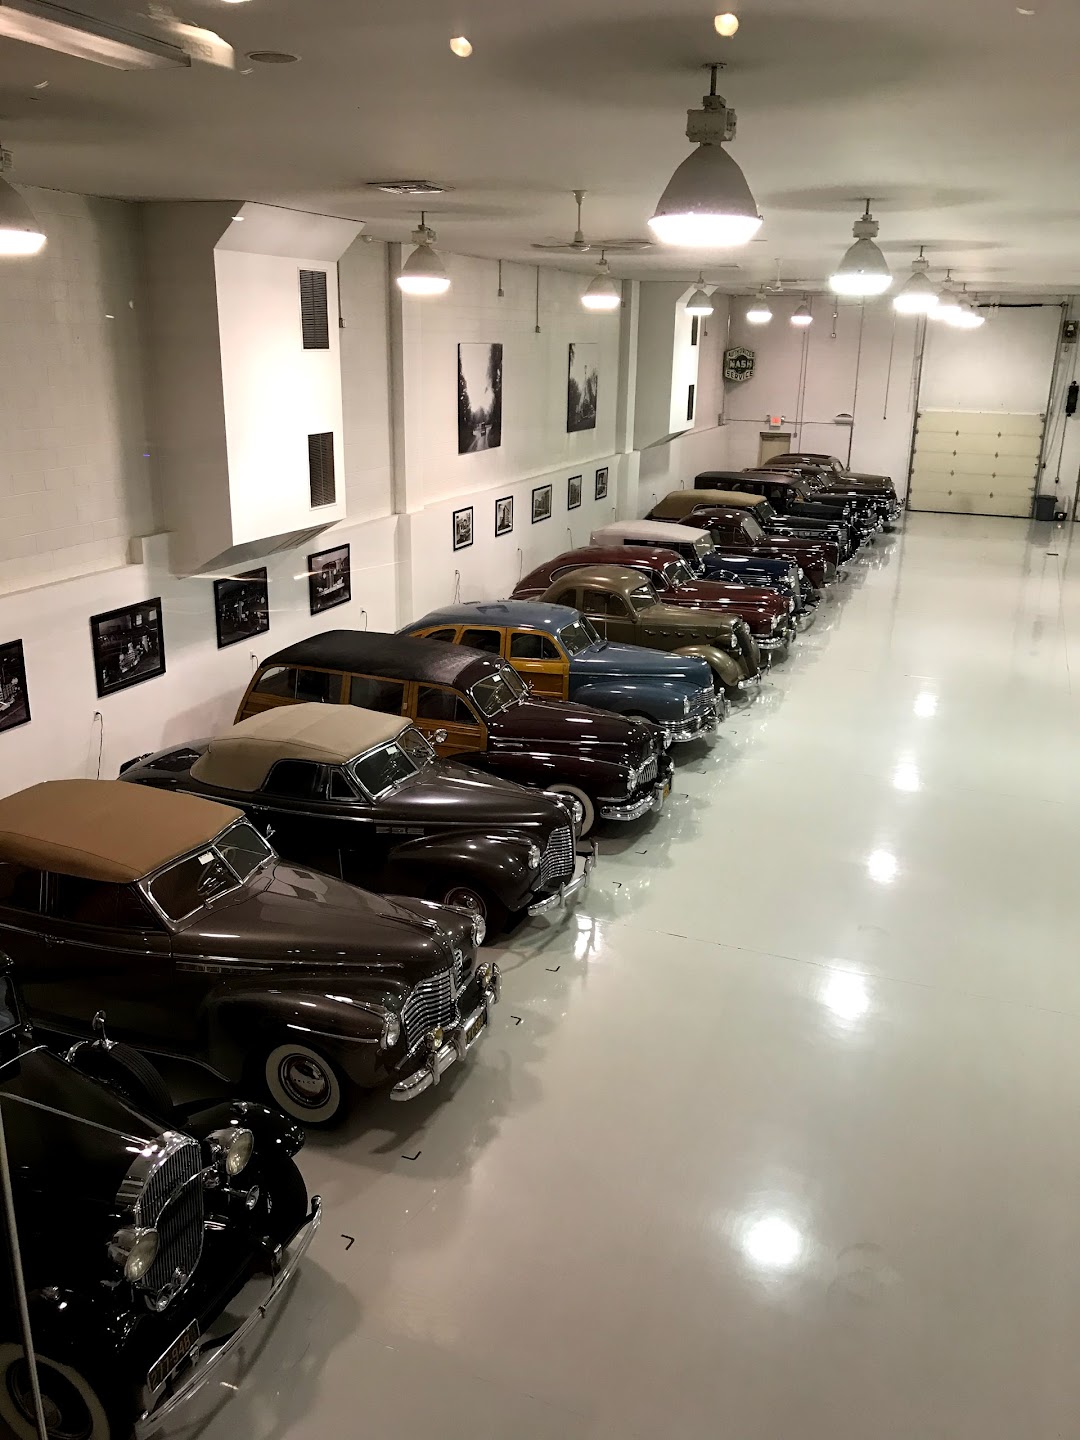 The NB Center for American Automotive Heritage